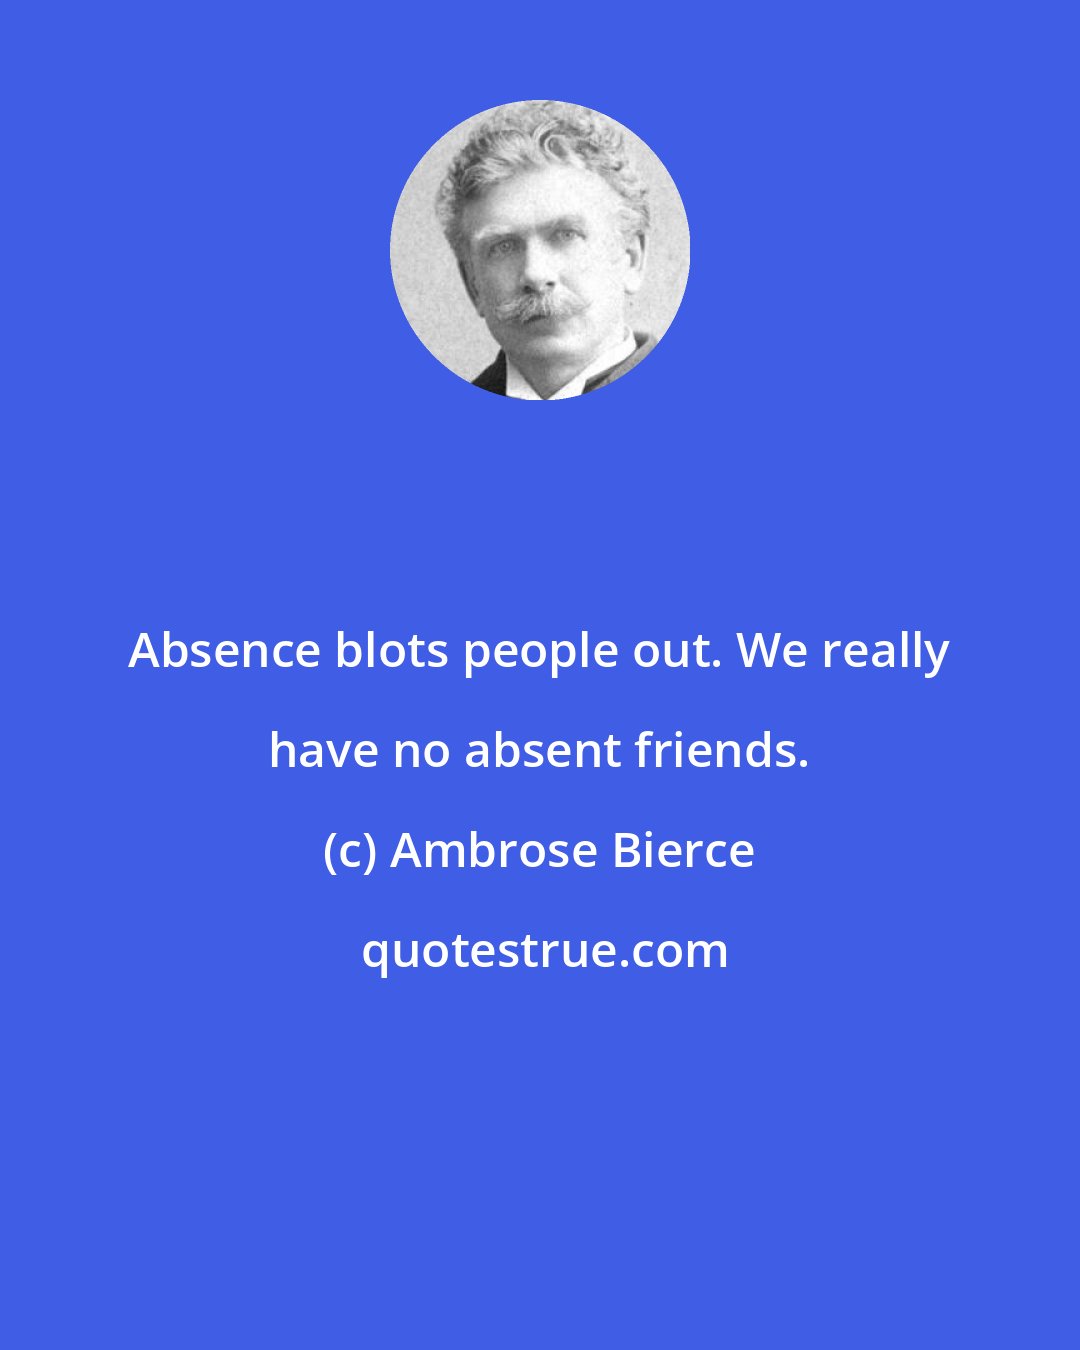 Ambrose Bierce: Absence blots people out. We really have no absent friends.